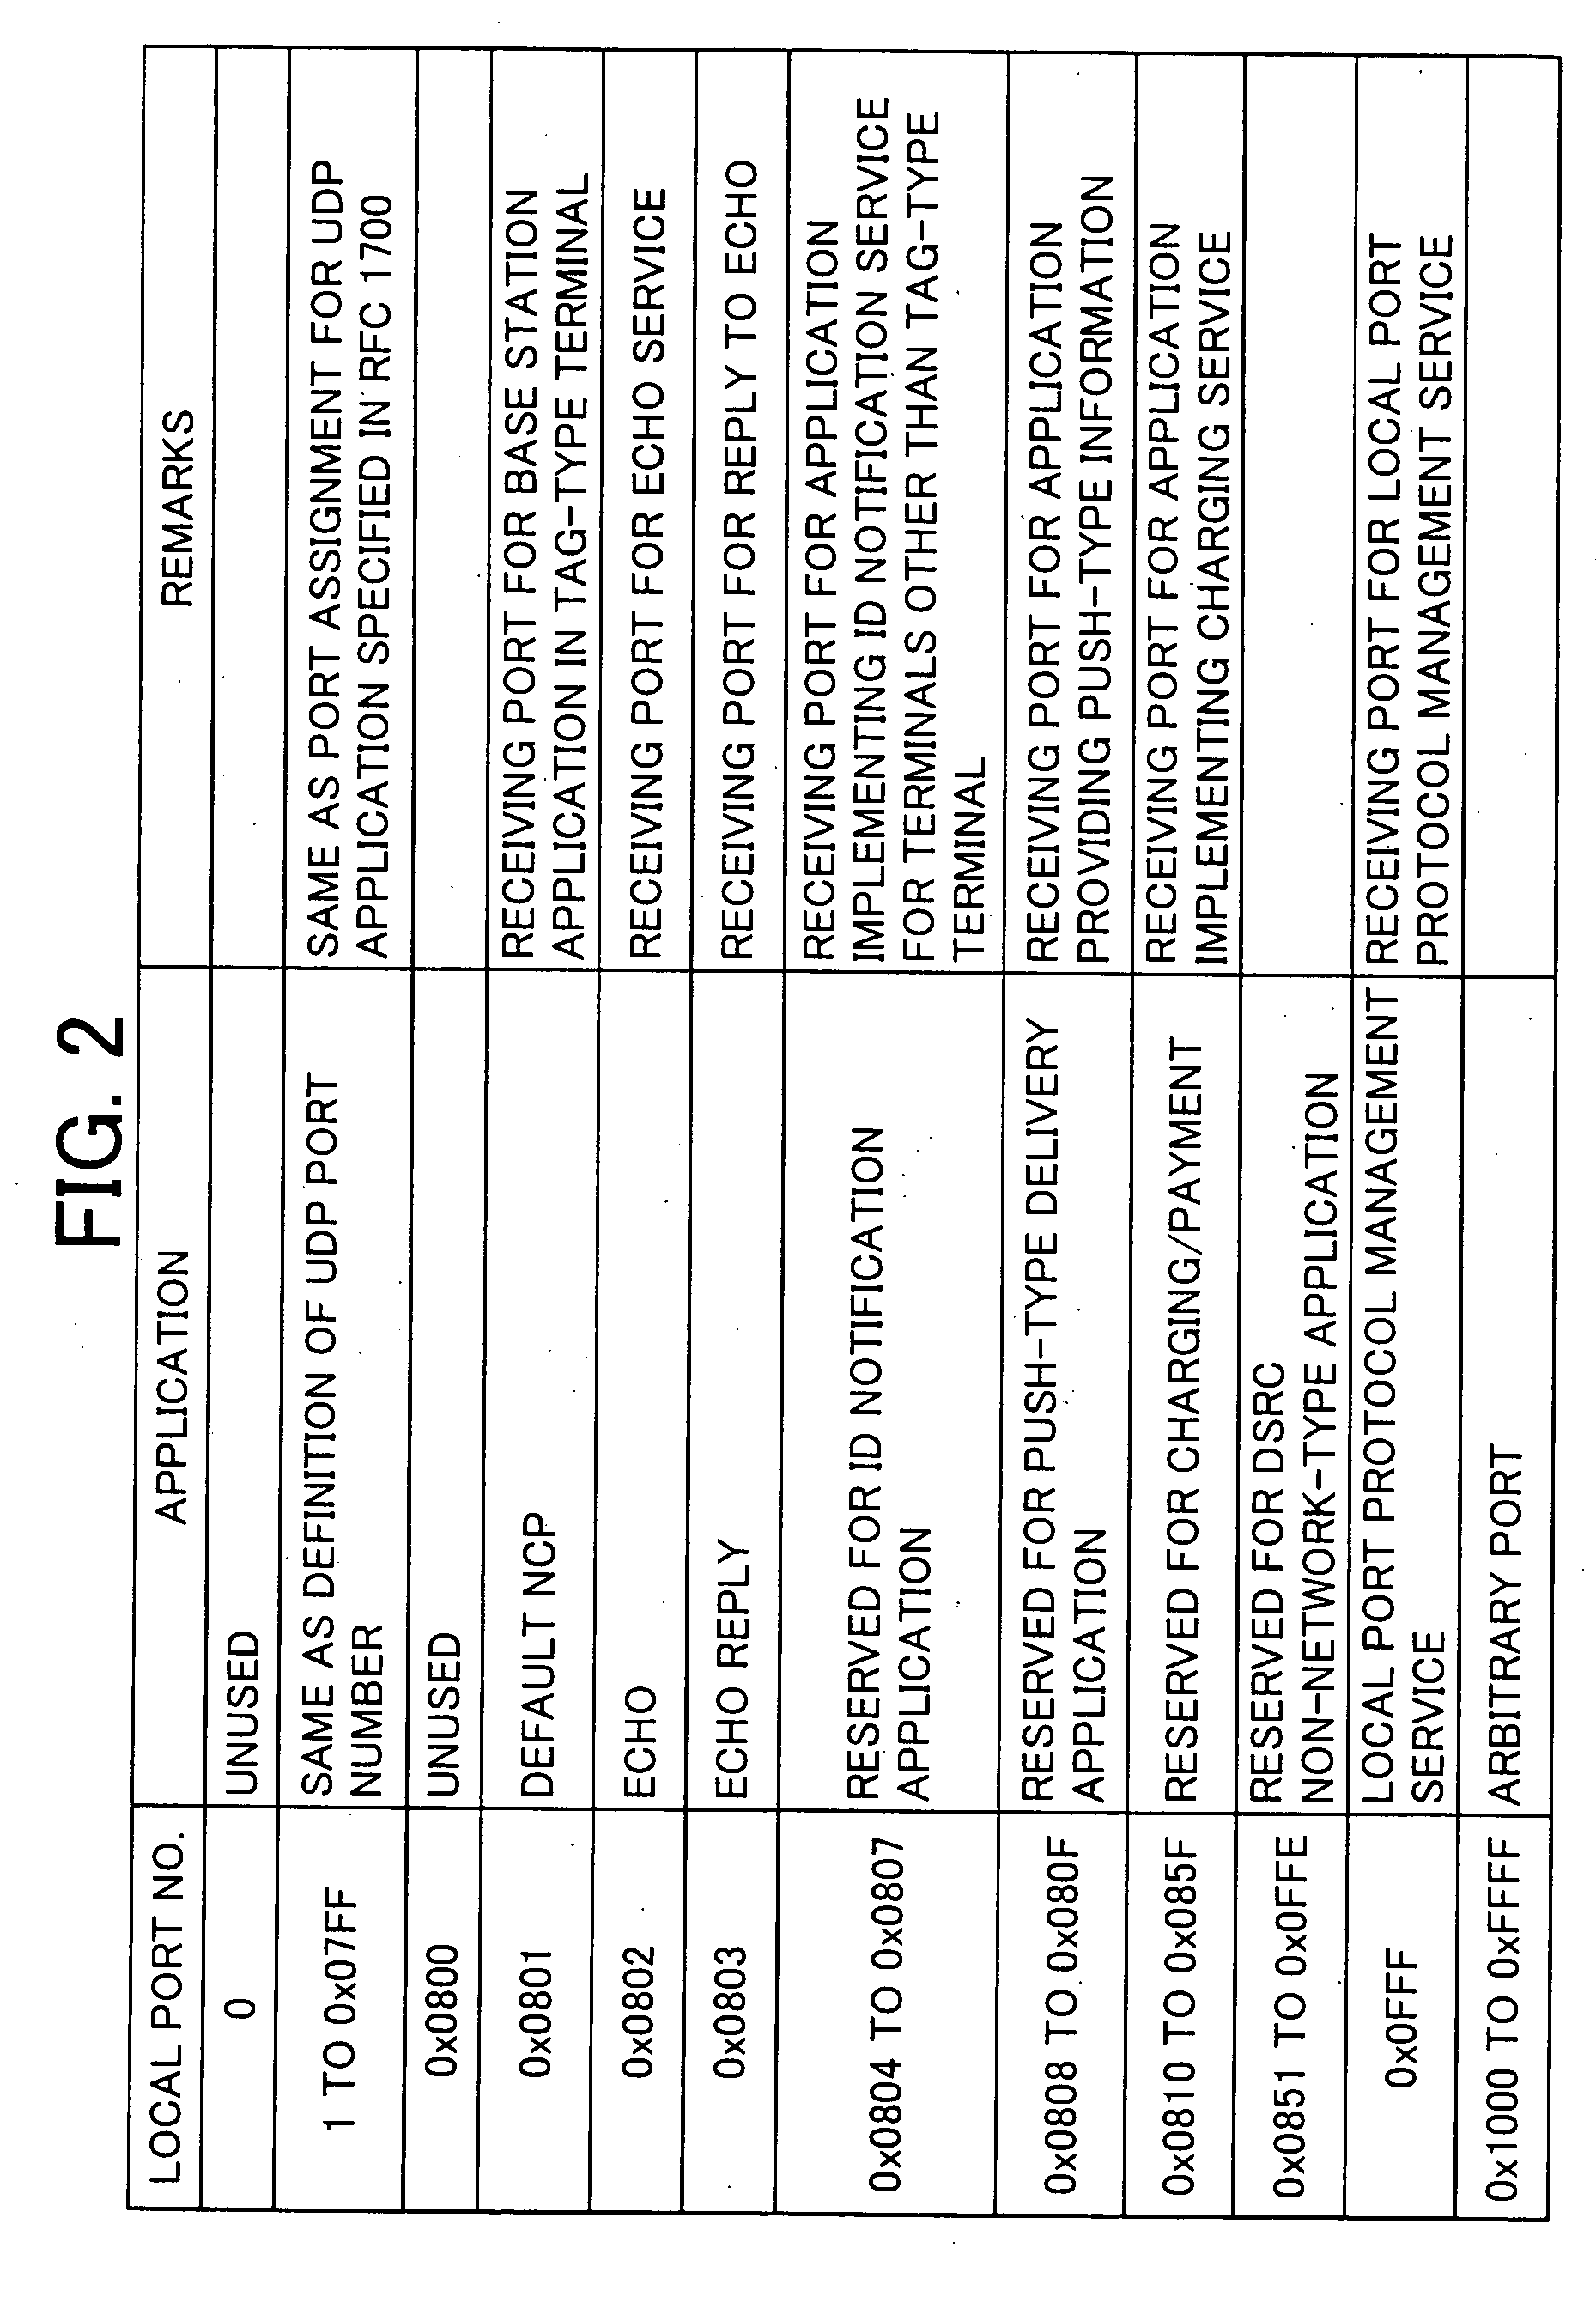 Between-load-and-vehicle communication system